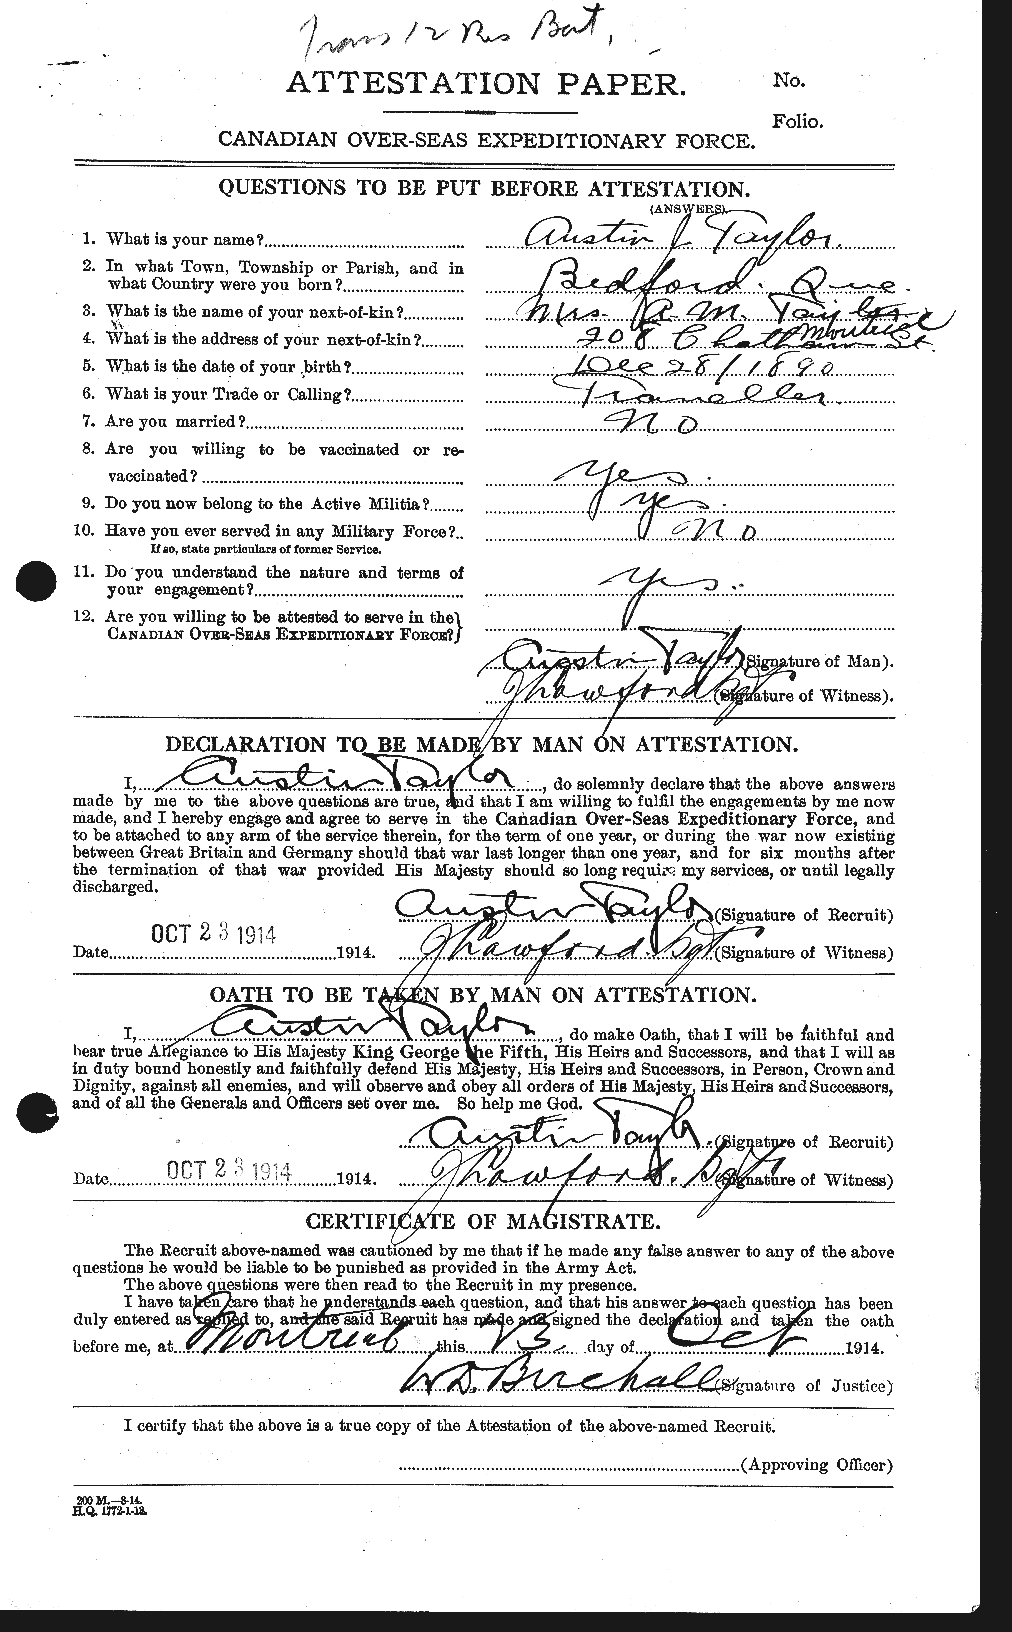 Personnel Records of the First World War - CEF 626754a